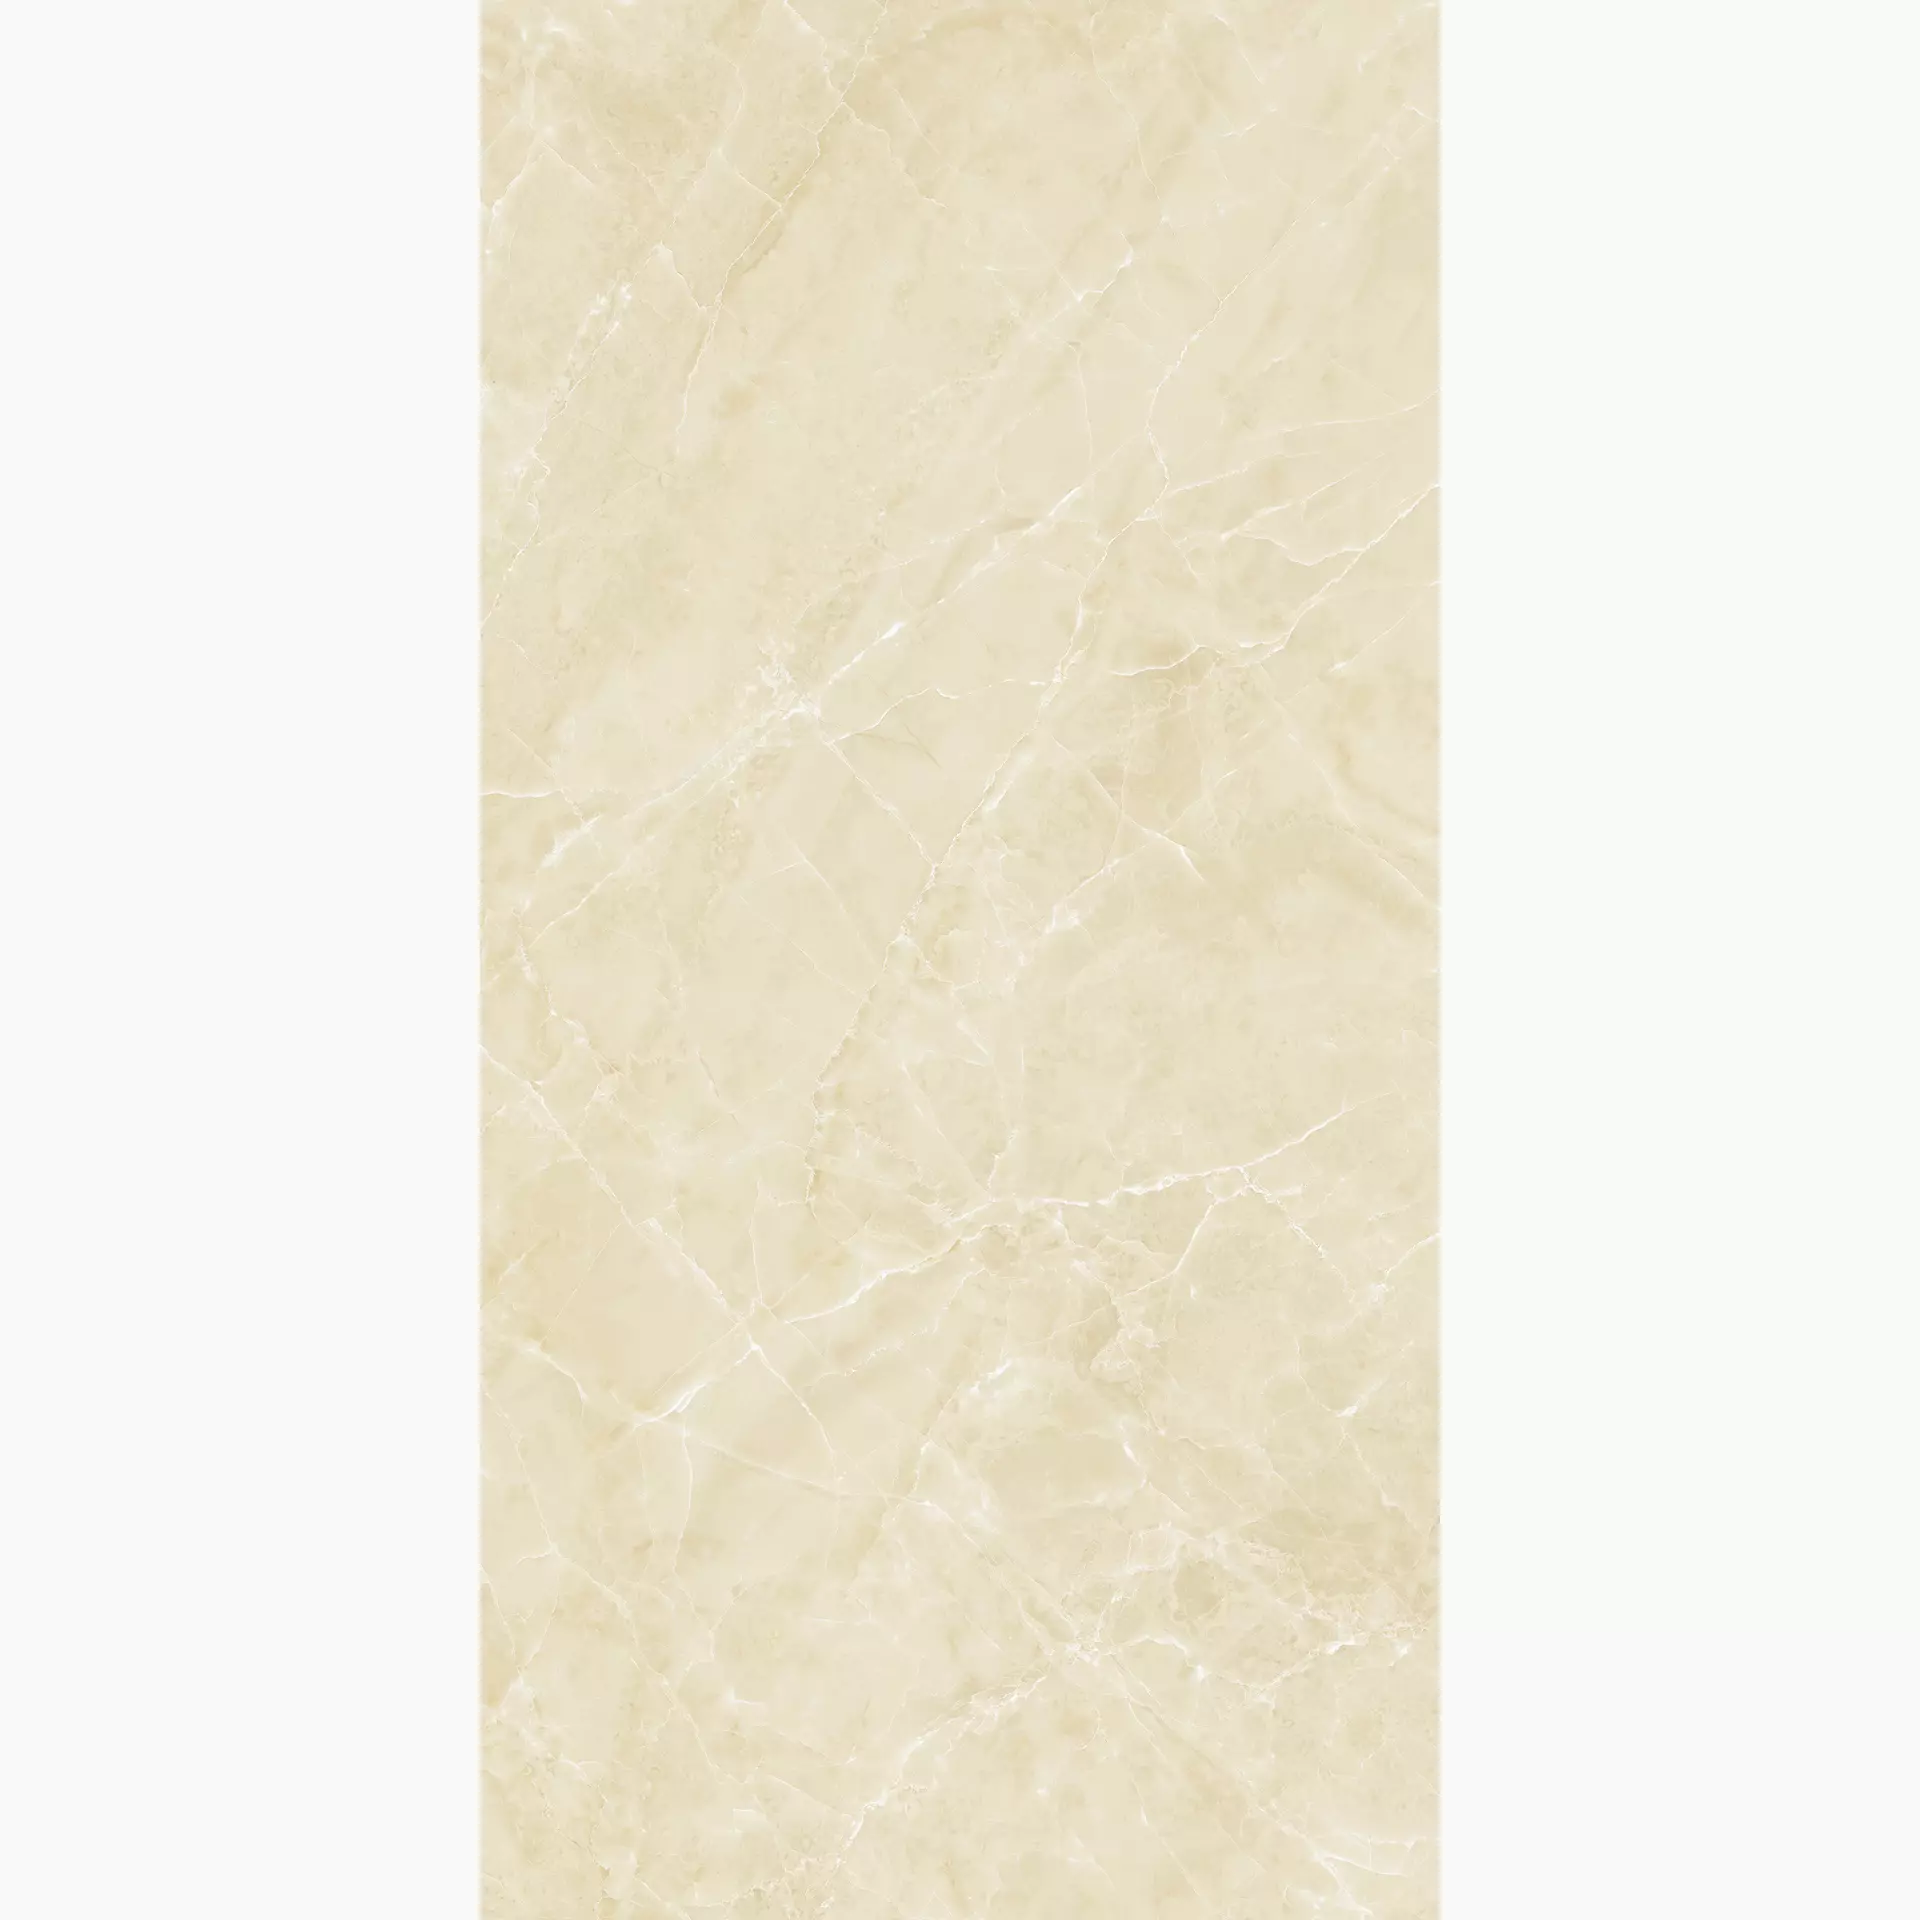 Mirage Jewels Jw 03 Royal Lucido Stair plate A SN87 30x60cm 9mm